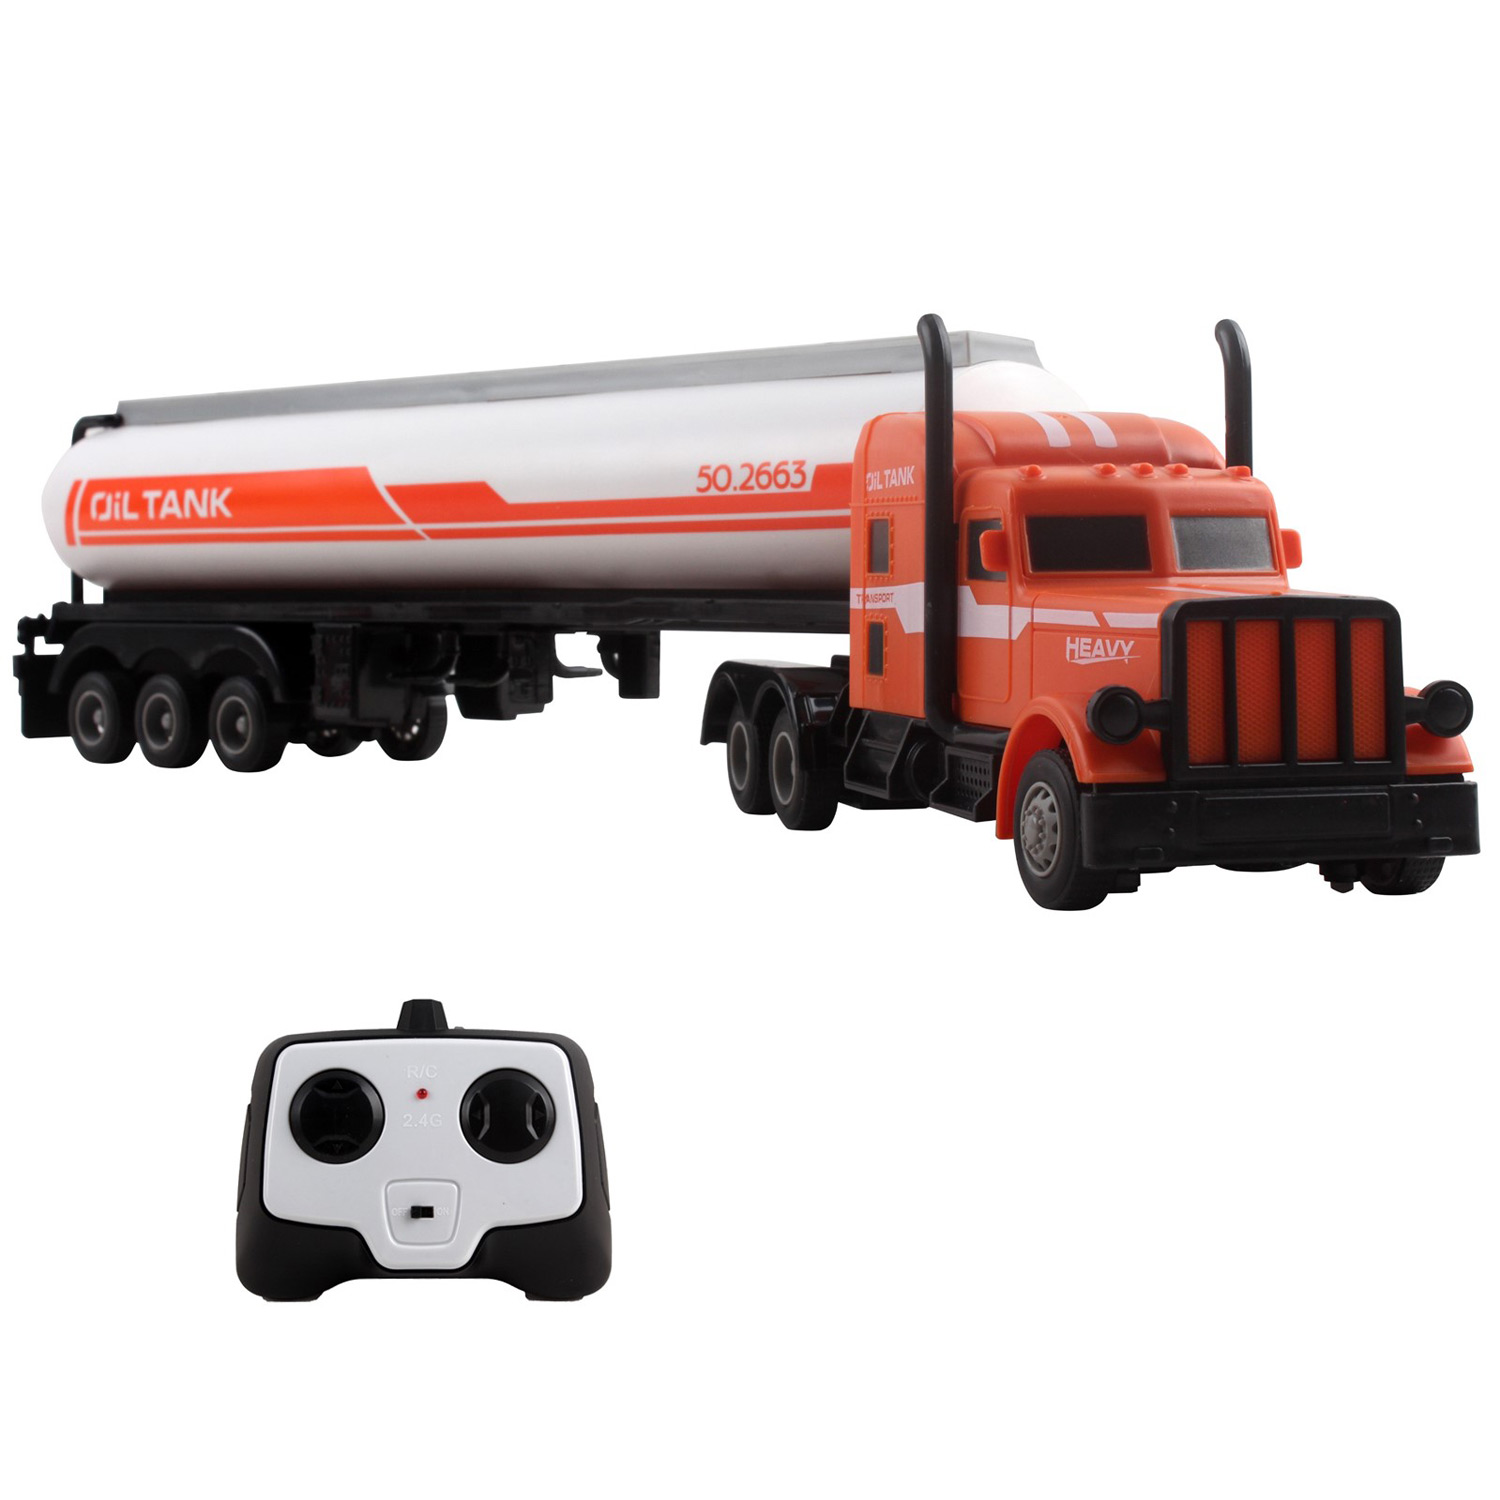 Large RC Semi Truck Fuel Trailer 18.7\" 2.4Ghz Fast Speed 1:16 Scale Electric Oil Hauler Rechargeable Remote Control Kids Big Rig Toy Carrier Transporter Cargo Vehicle Perfect Gift For Children